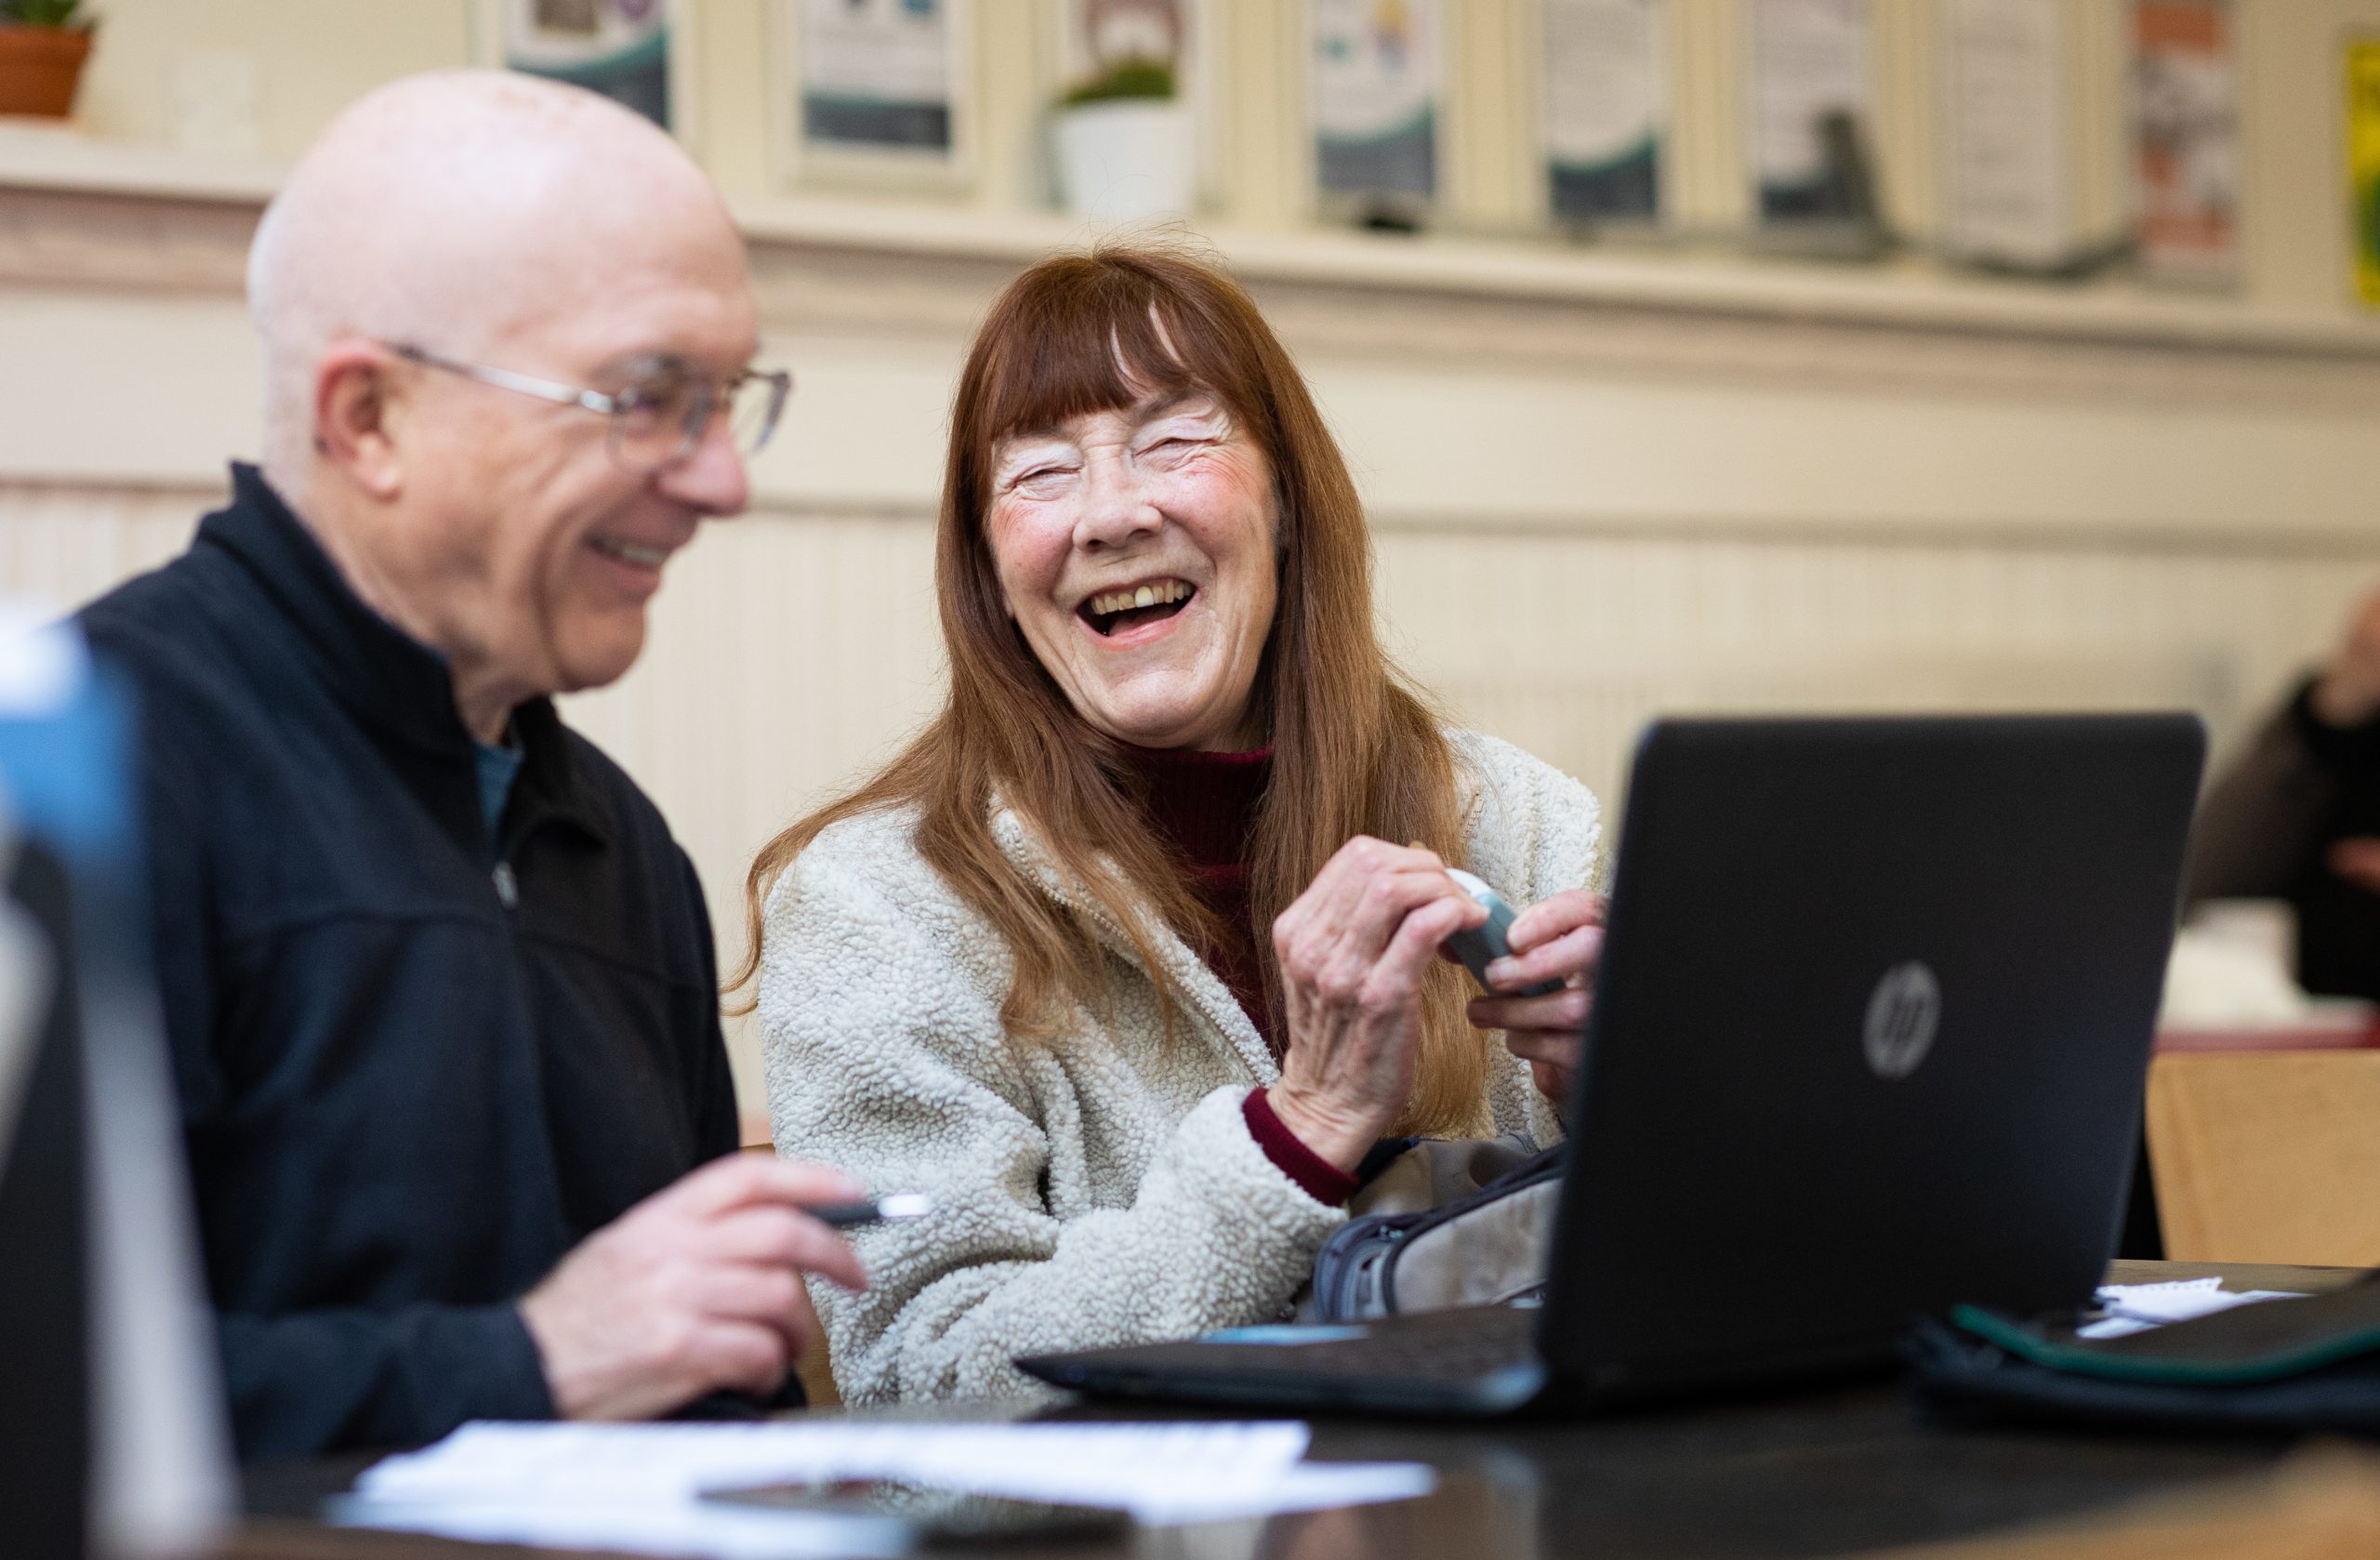 Two older people smiling and using a laptop.